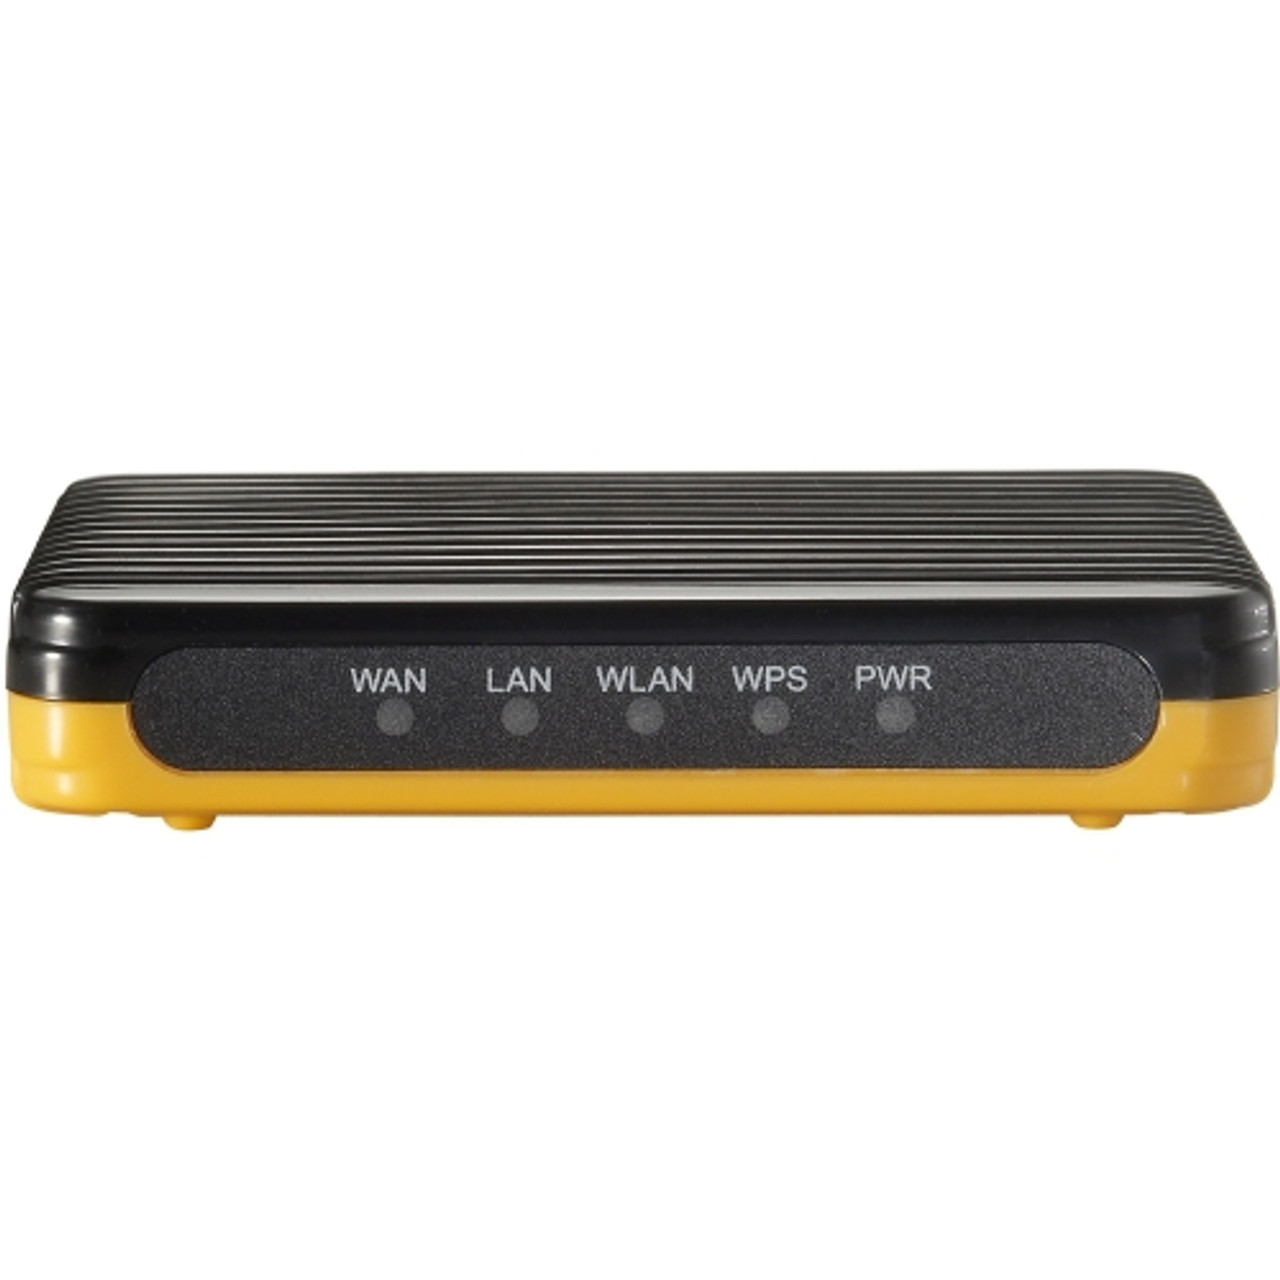 WBR-6802 LevelOne Wireless N 150Mbps Travel Router Wireless N 150Mbps, WEP, WPA-PSK, WPA2-PSK, WPS (Refurbished)